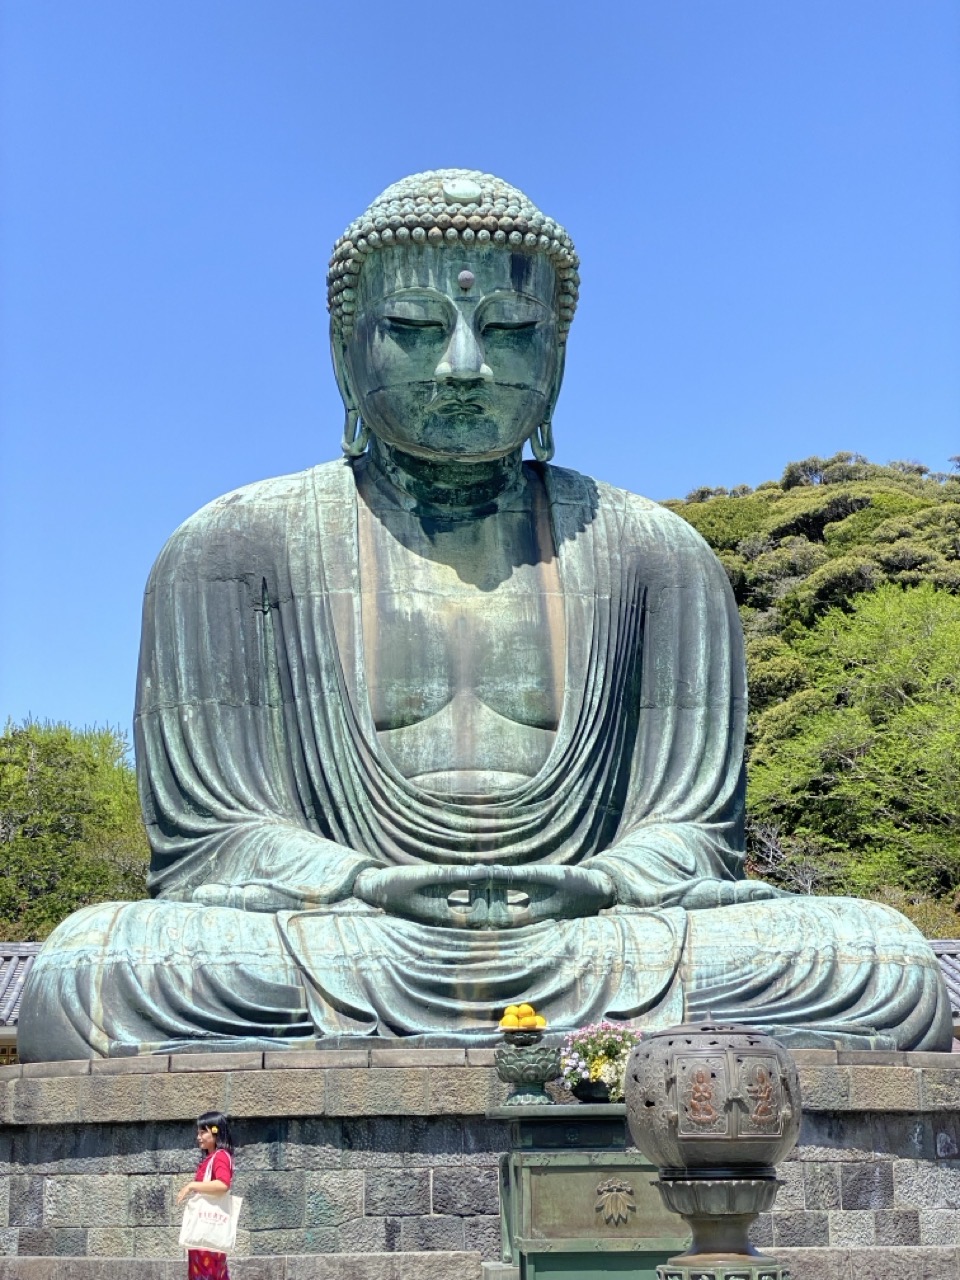 The great Buddha, with trees and a blue sky in the background